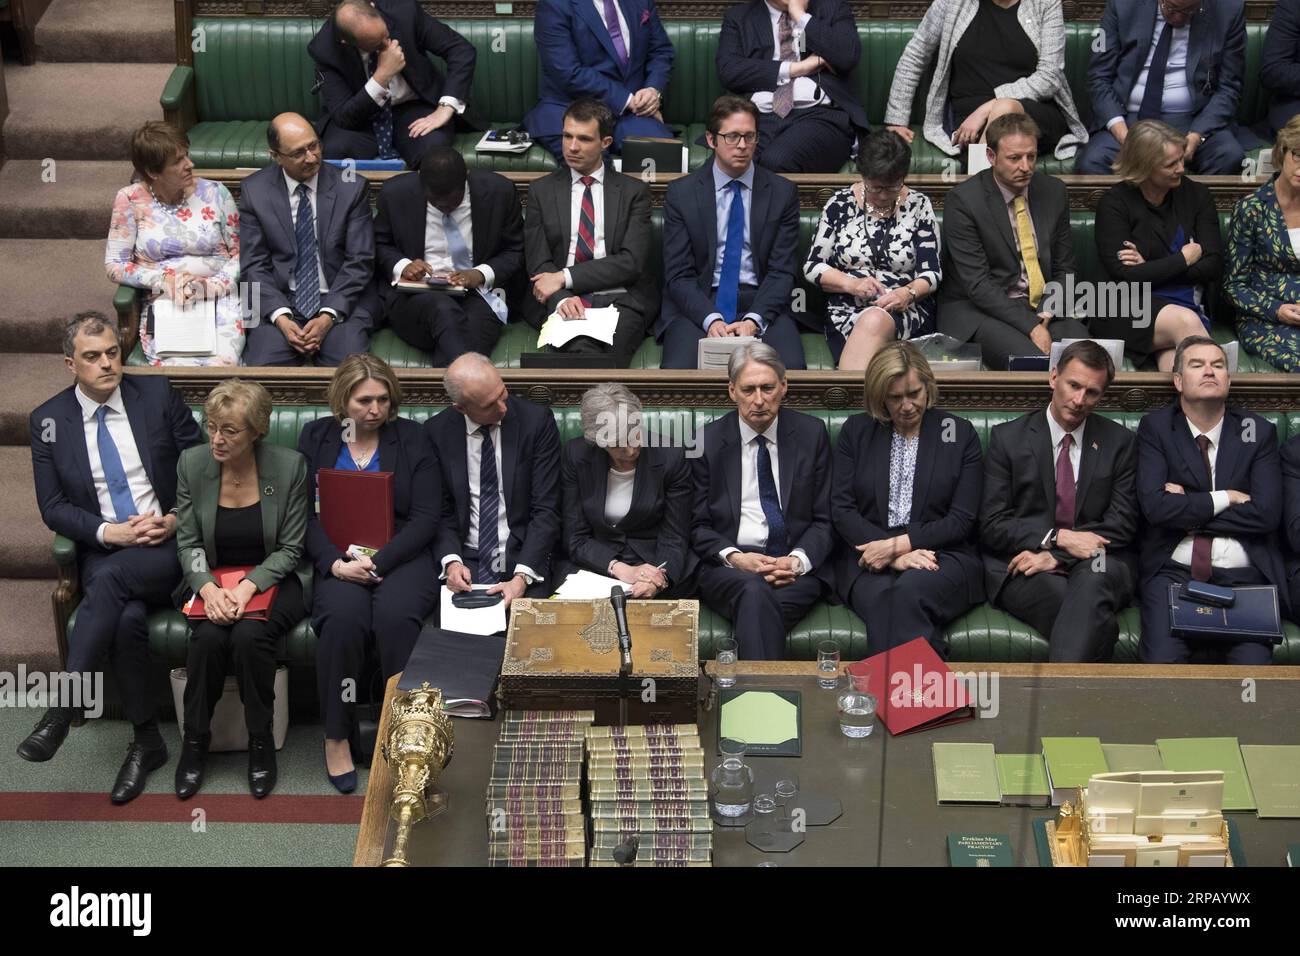 (190522) -- LONDON, May 22, 2019 -- British Prime Minister Theresa May (C, front) and the leader of the House of Commons Andrea Leadsom (2nd L, front) attend the Prime Minister s Questions at the House of Commons in London, Britain, on May 22, 2019. The British leader of the House of Commons Andrea Leadsom on Wednesday resigned amid growing discontent with the prime minster s leadership, one day after the new Brexit agreement backfired. ) HOC MANDATORY CREDIT: BRITAIN-LONDON-HOUSE OF COMMONS-LEADER-RESIGNATION UKxParliament/MarkxDuffy PUBLICATIONxNOTxINxCHN Stock Photo